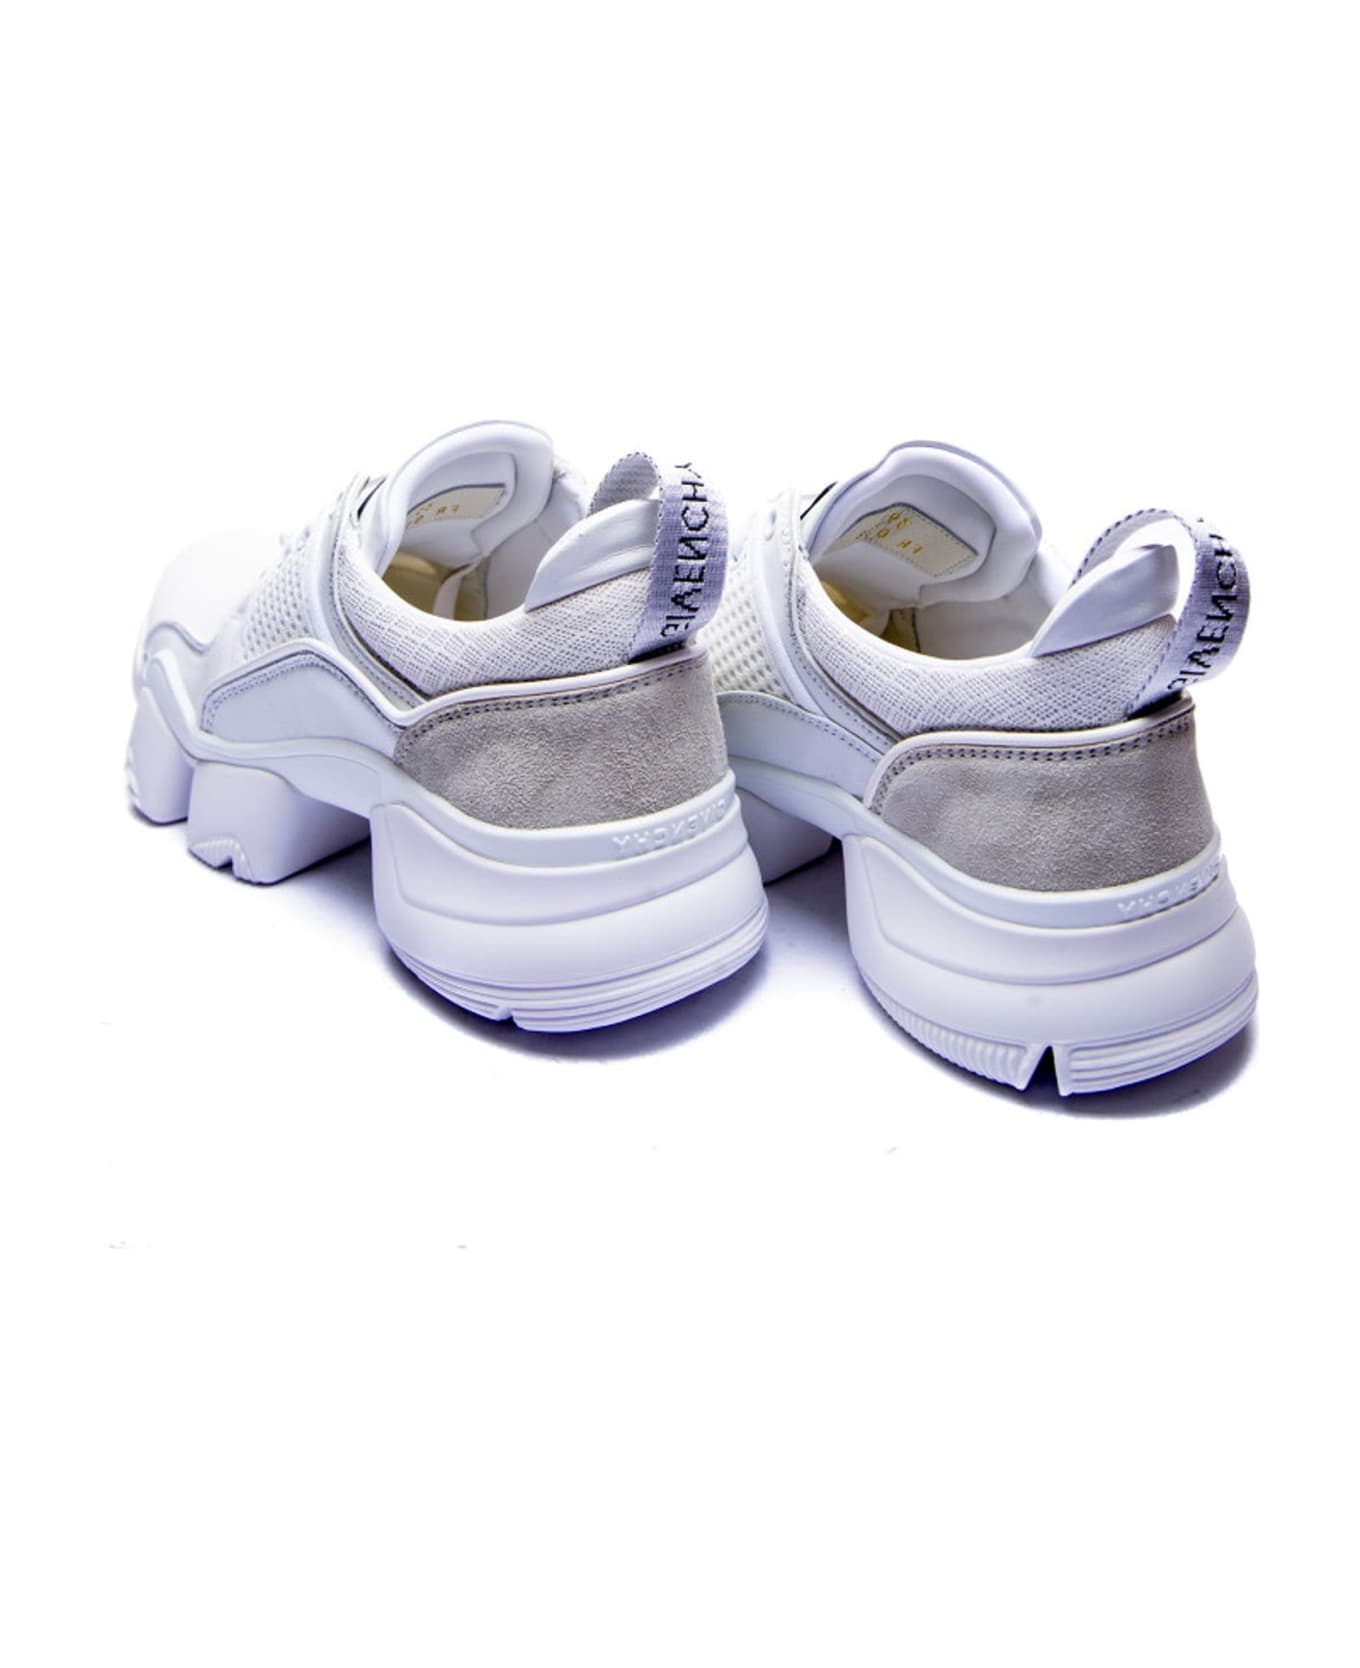 Givenchy Jaw Leather Sneakers - White スニーカー